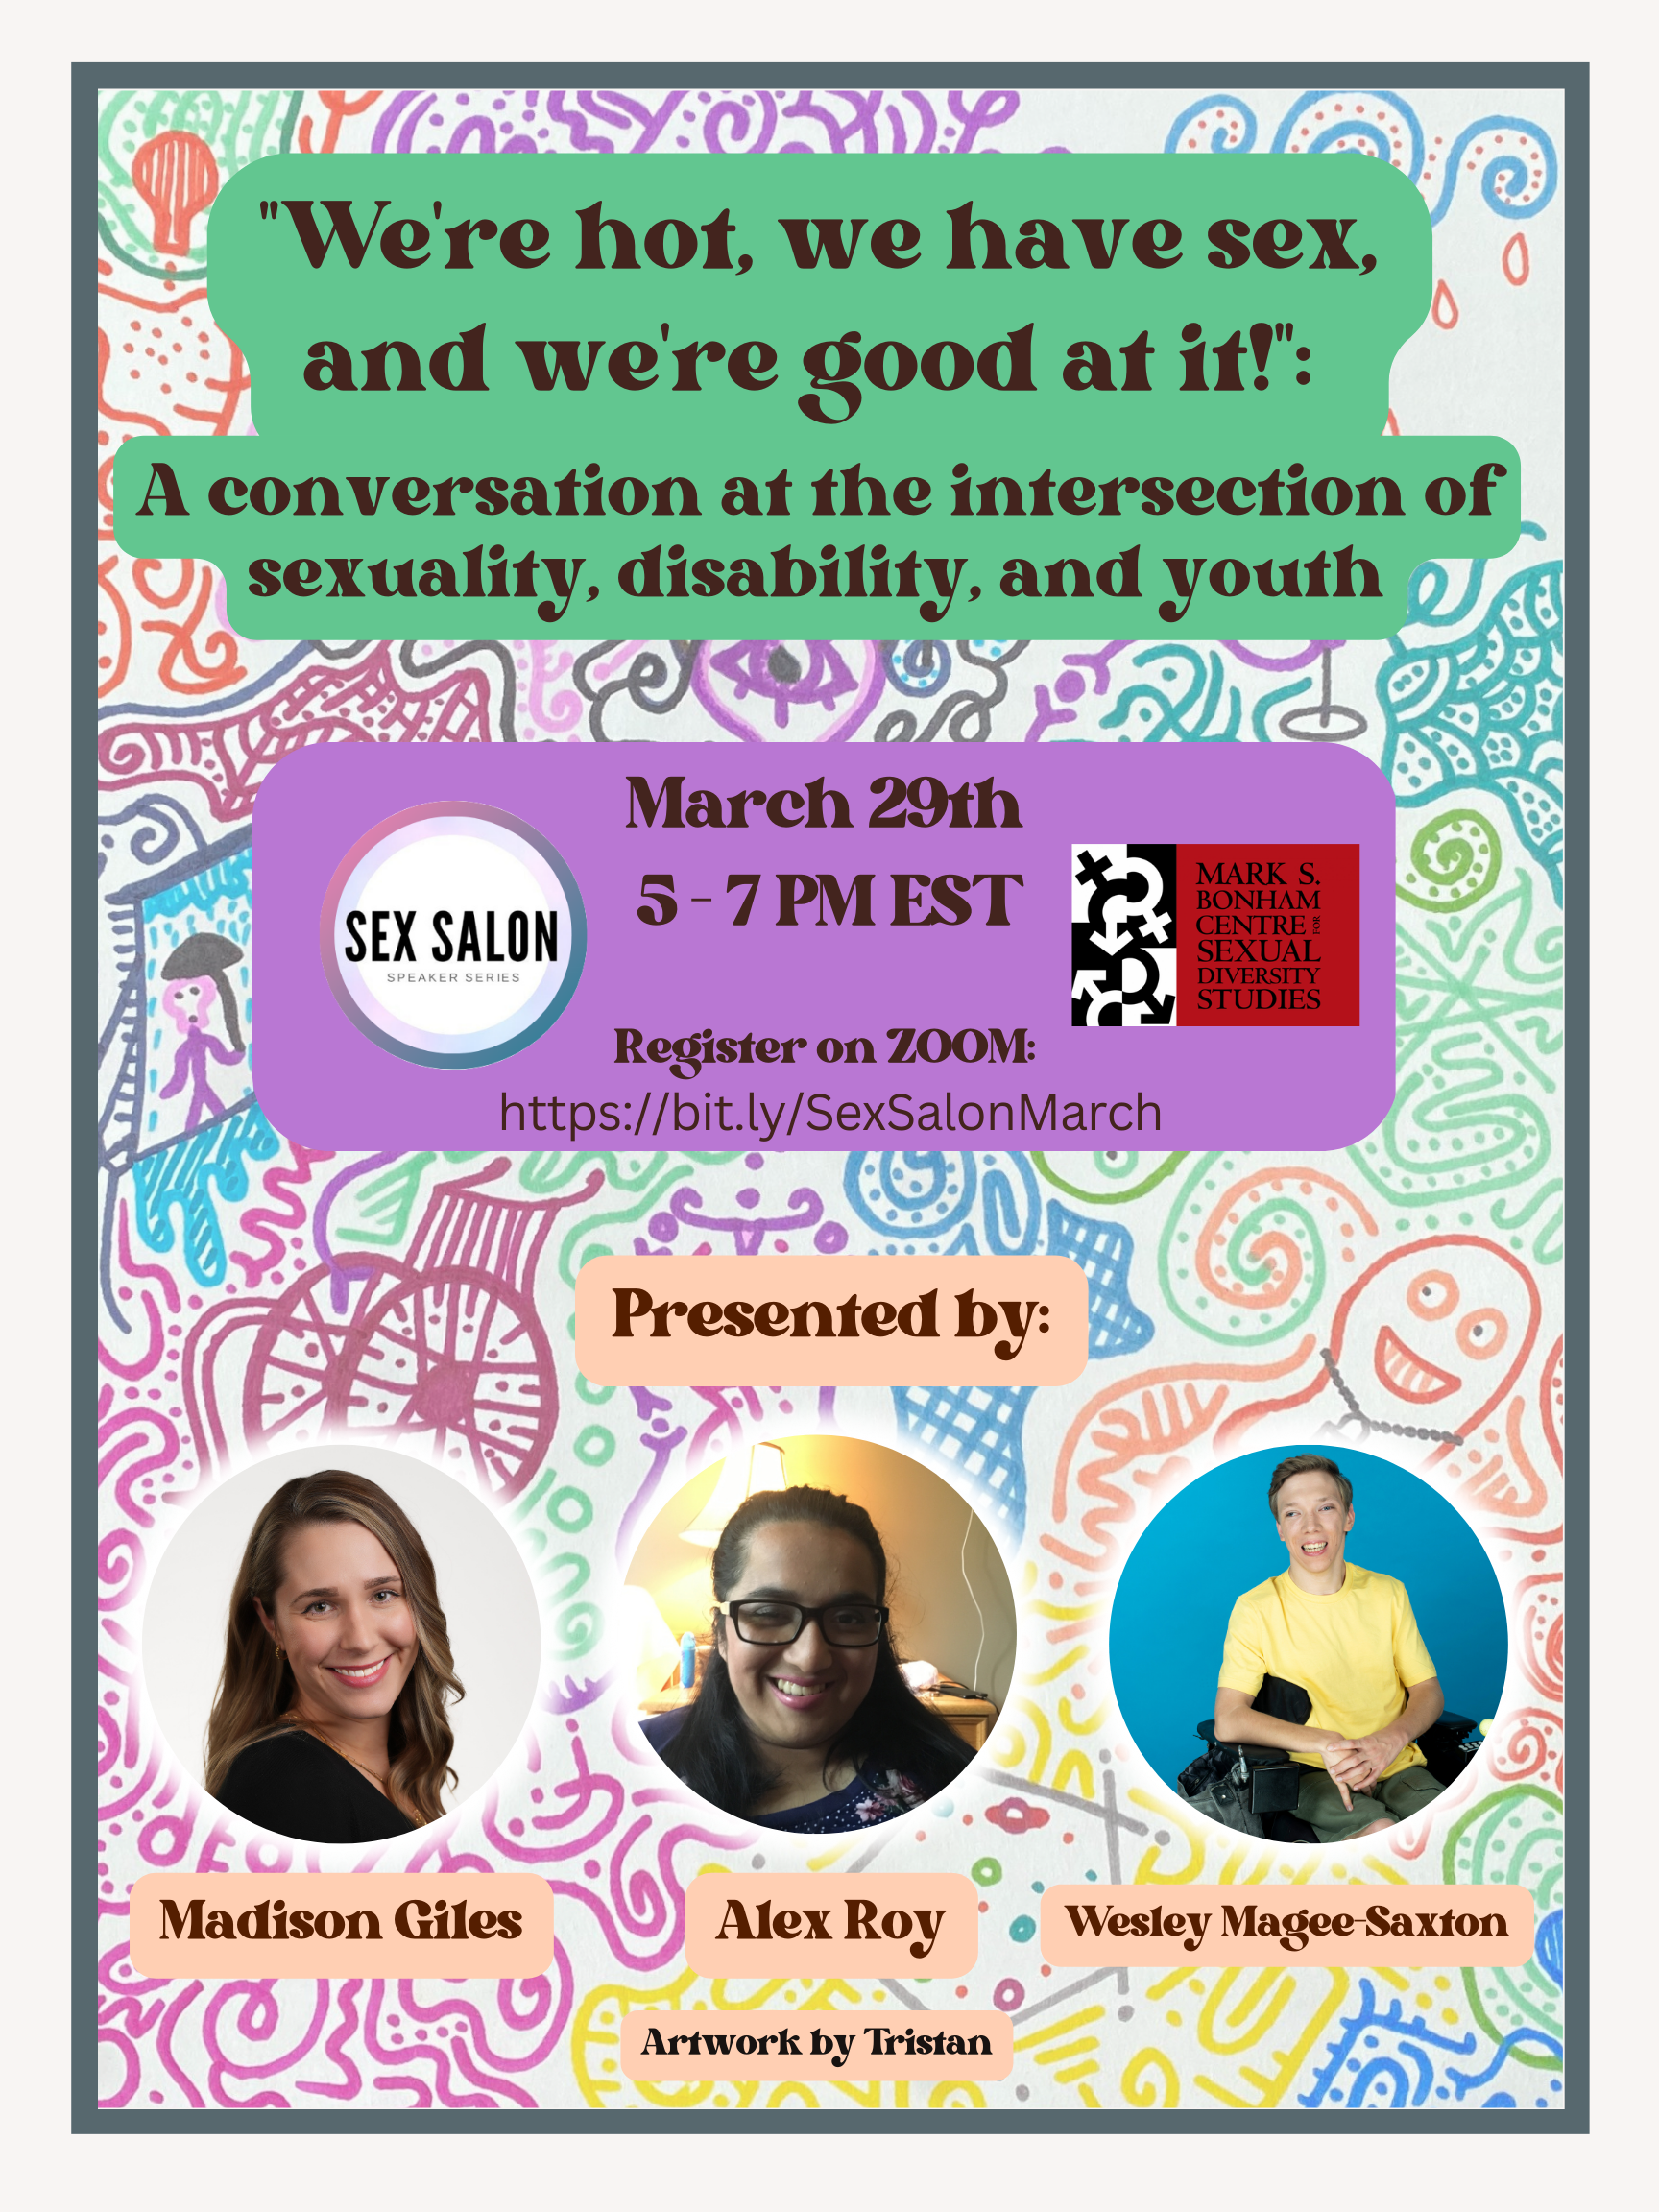 A poster decorated with marker doodles. On a green backdrop in the top 3rd, reads the title: We're Hot, we have sex, and we're good at it!" A conversation at the intersection of sexuality, disability, and youth. Below reads the date: March 29, 7-7PM, surrounded by the sex salon and Bonham Centre logos. In three floating bubbles in the lower 3rd, are the headshots of the presenters, Madison Giles, Alex Roy, and Wesley Magee-Saxton